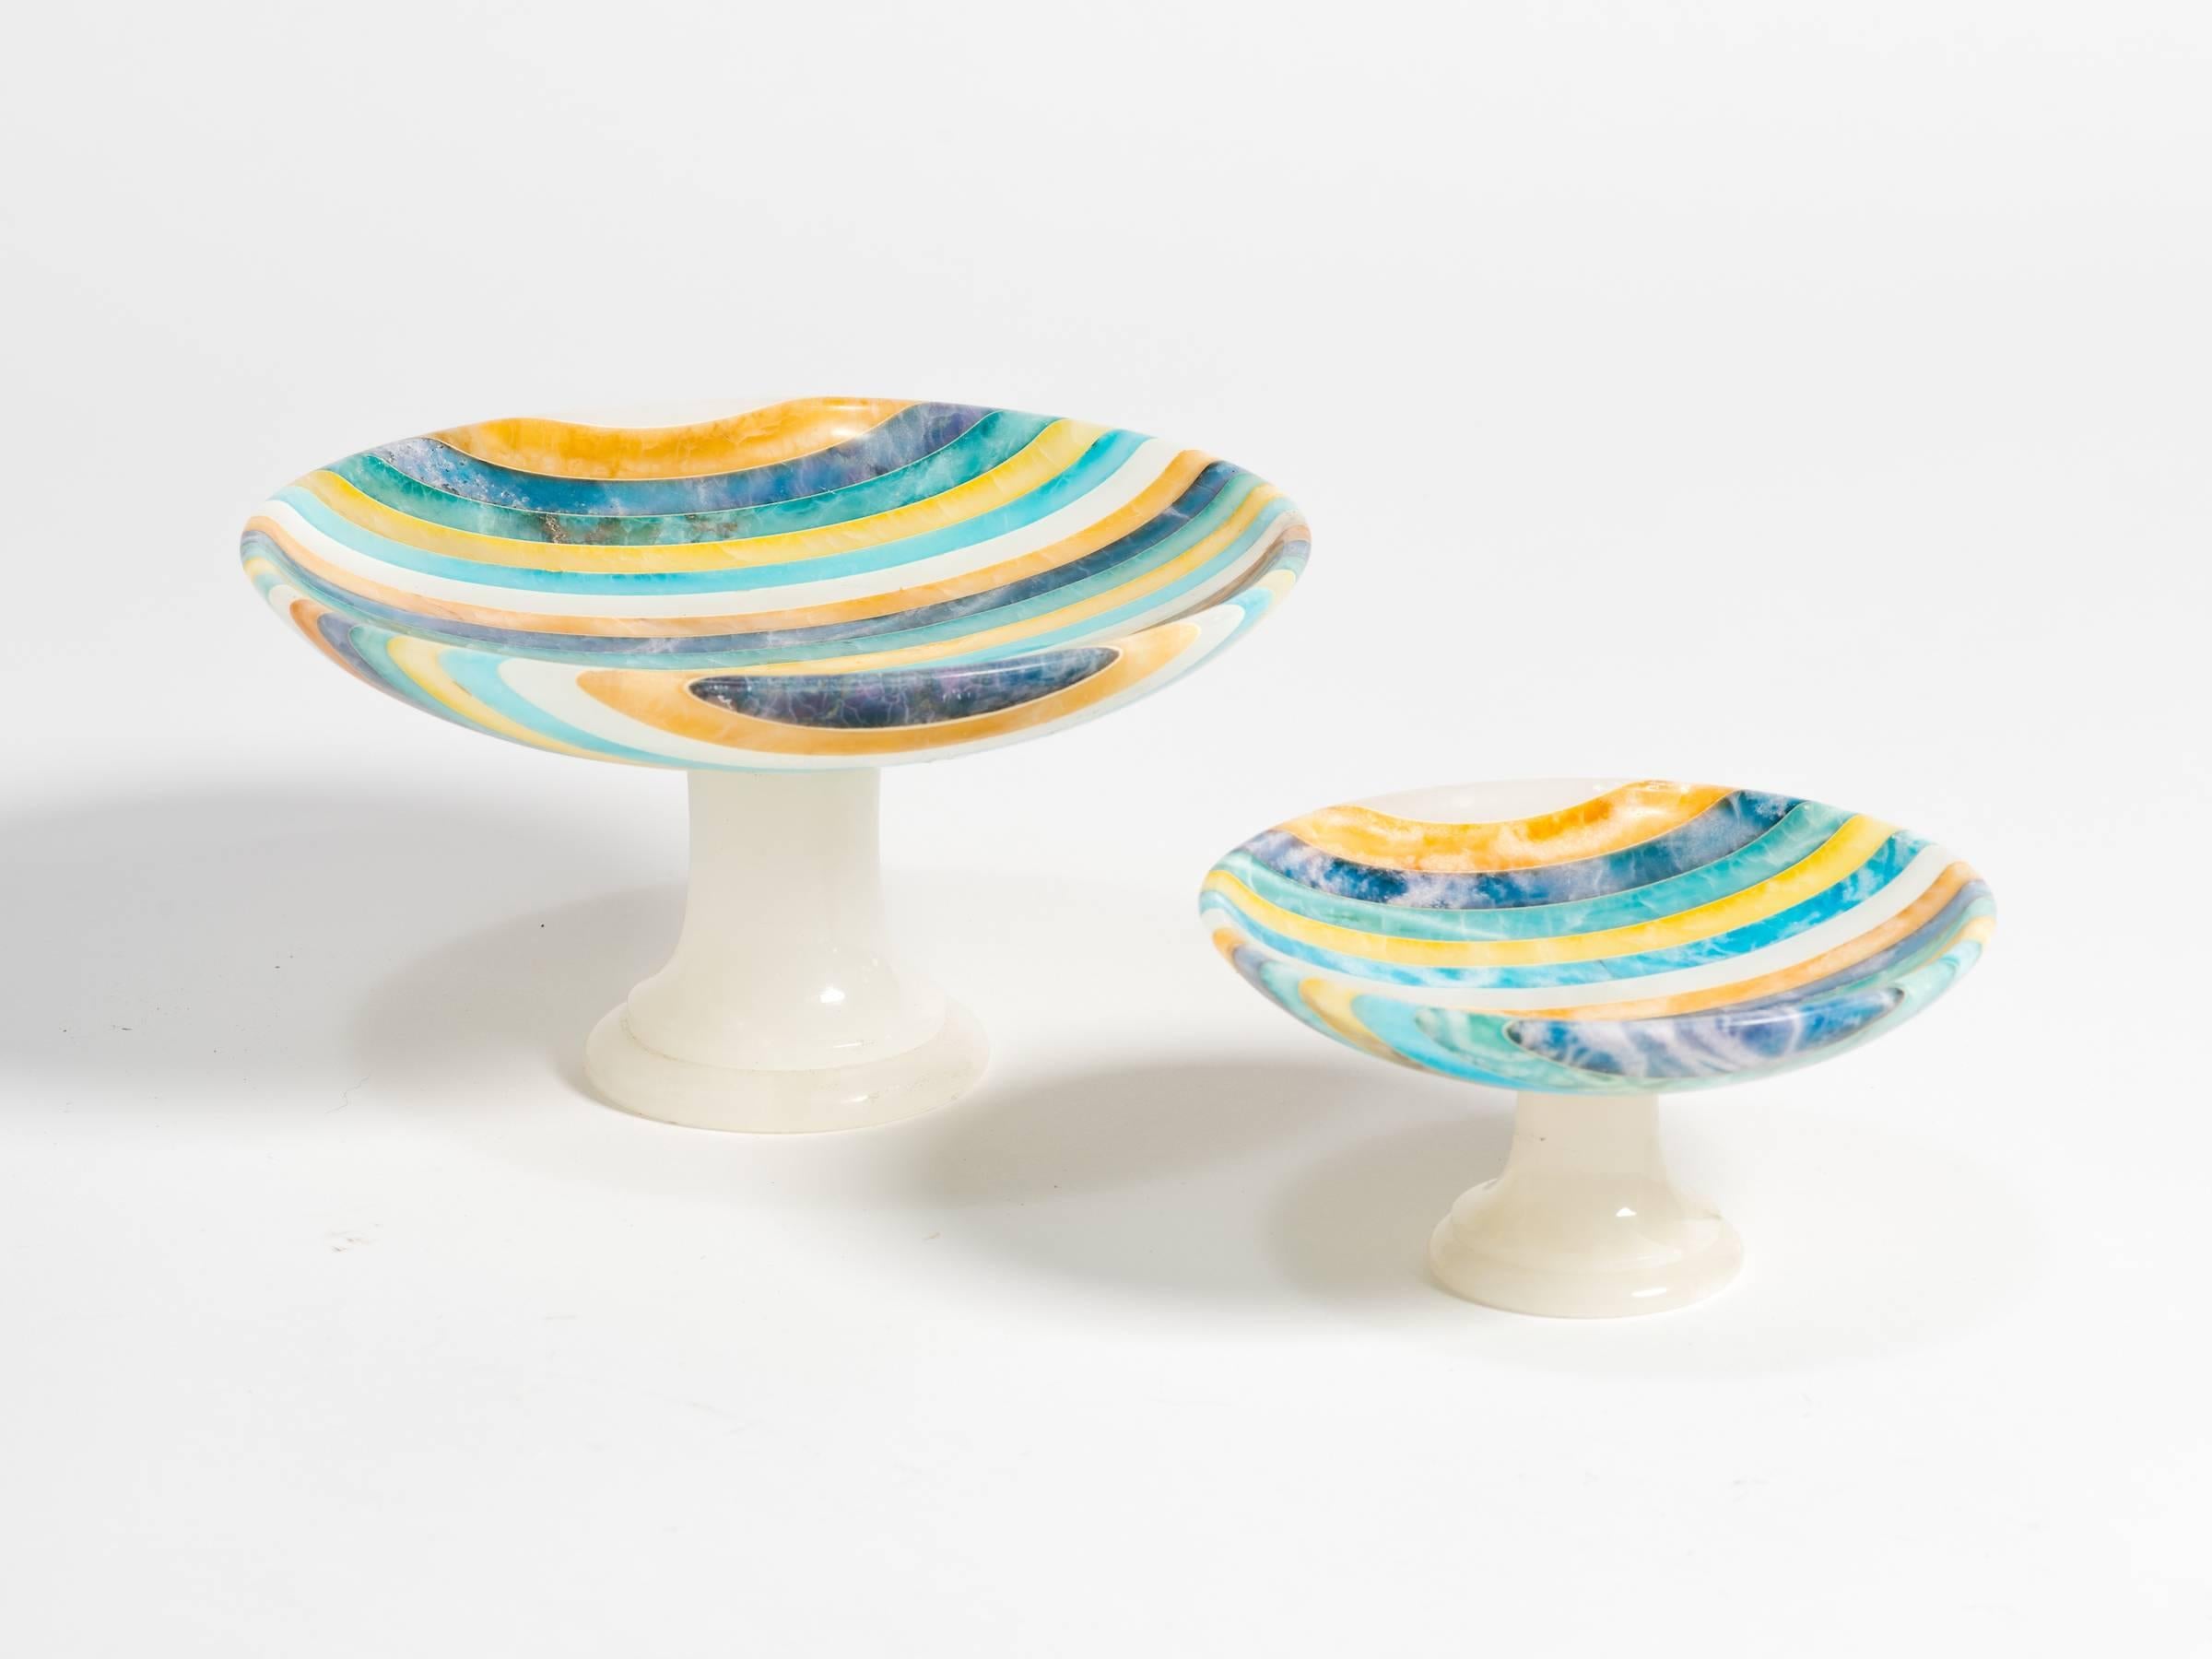 One large and one small, Italian multi colored compotes.
Price of the small compote is 140.00. Measurements: 6.75 and height 3.5.